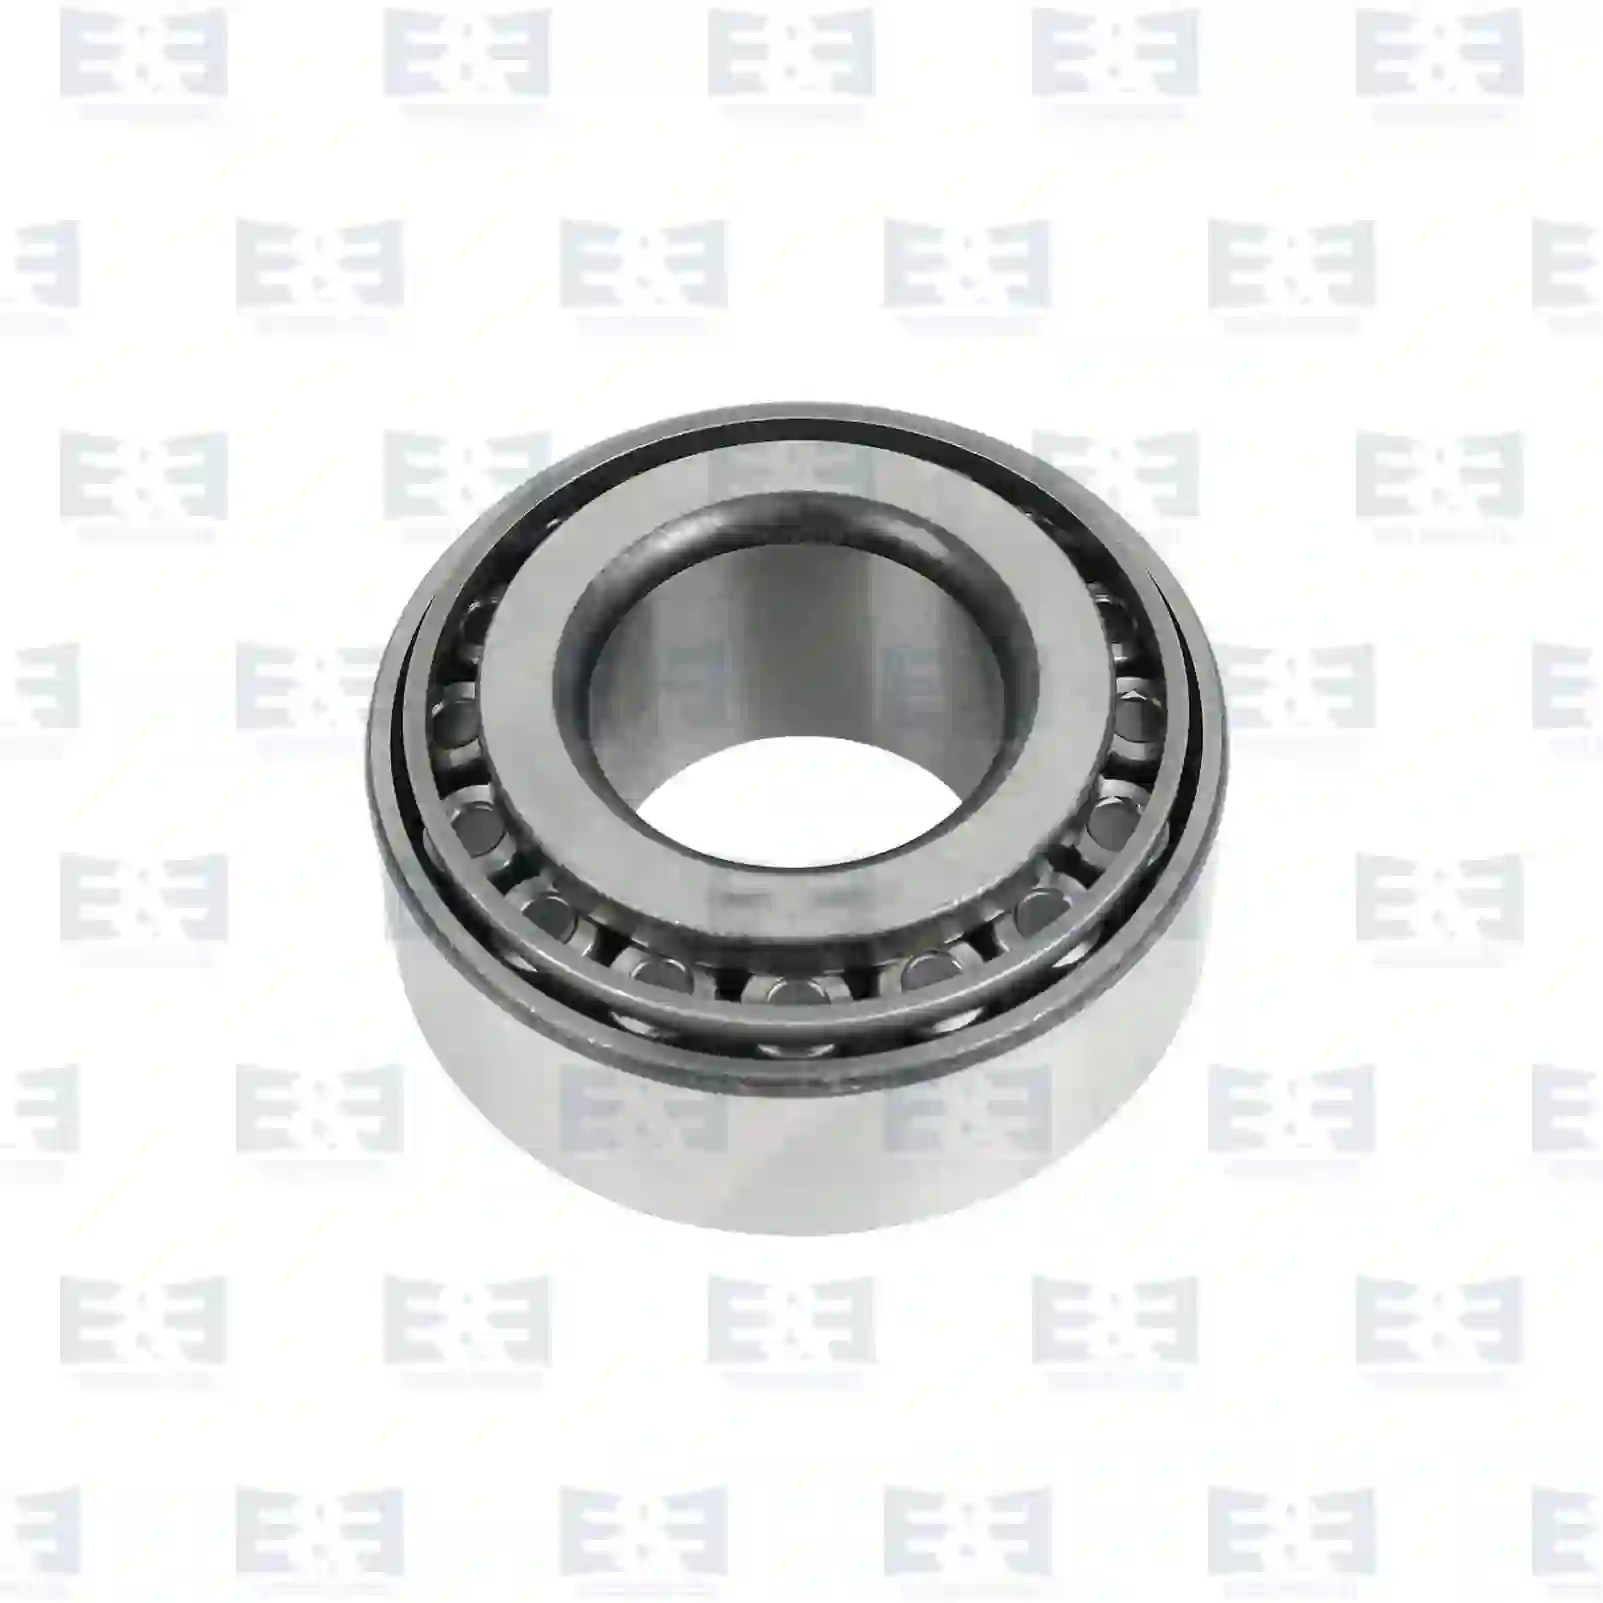 Gearbox Unit Tapered roller bearing, EE No 2E2279427 ,  oem no:103978, 0691357, 1818257, 691357, 9418062, 1-33319-087-0, 00623660, 07982090, 42492258, 623660, 750117009, 7982090, 187992, 81934200187, 81934200391, 81934200413, 82934200018, 0019808402, 5001843170, 7421313308, 7421318172, 1662515, 21313308, 21318172, ZG03027-0008 E&E Truck Spare Parts | Truck Spare Parts, Auotomotive Spare Parts